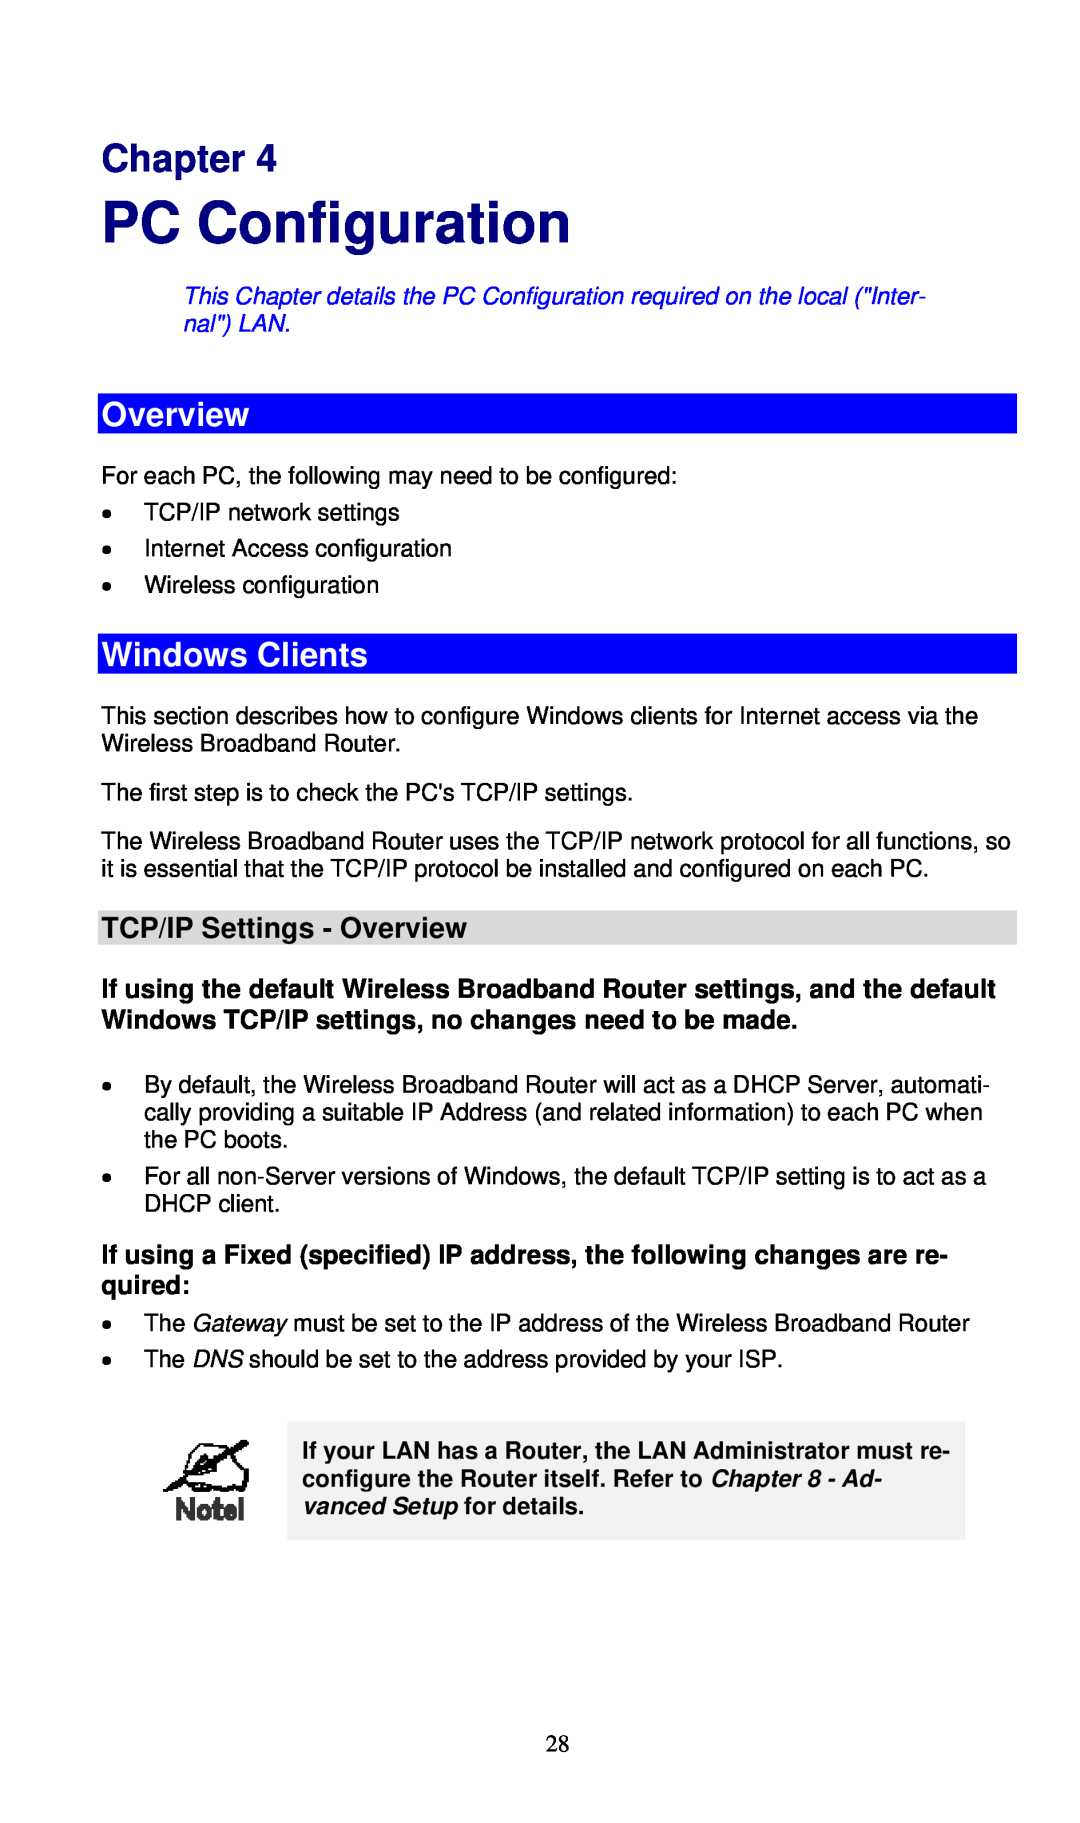 LevelOne WBR-6000 user manual PC Configuration, Windows Clients, TCP/IP Settings - Overview, Chapter 